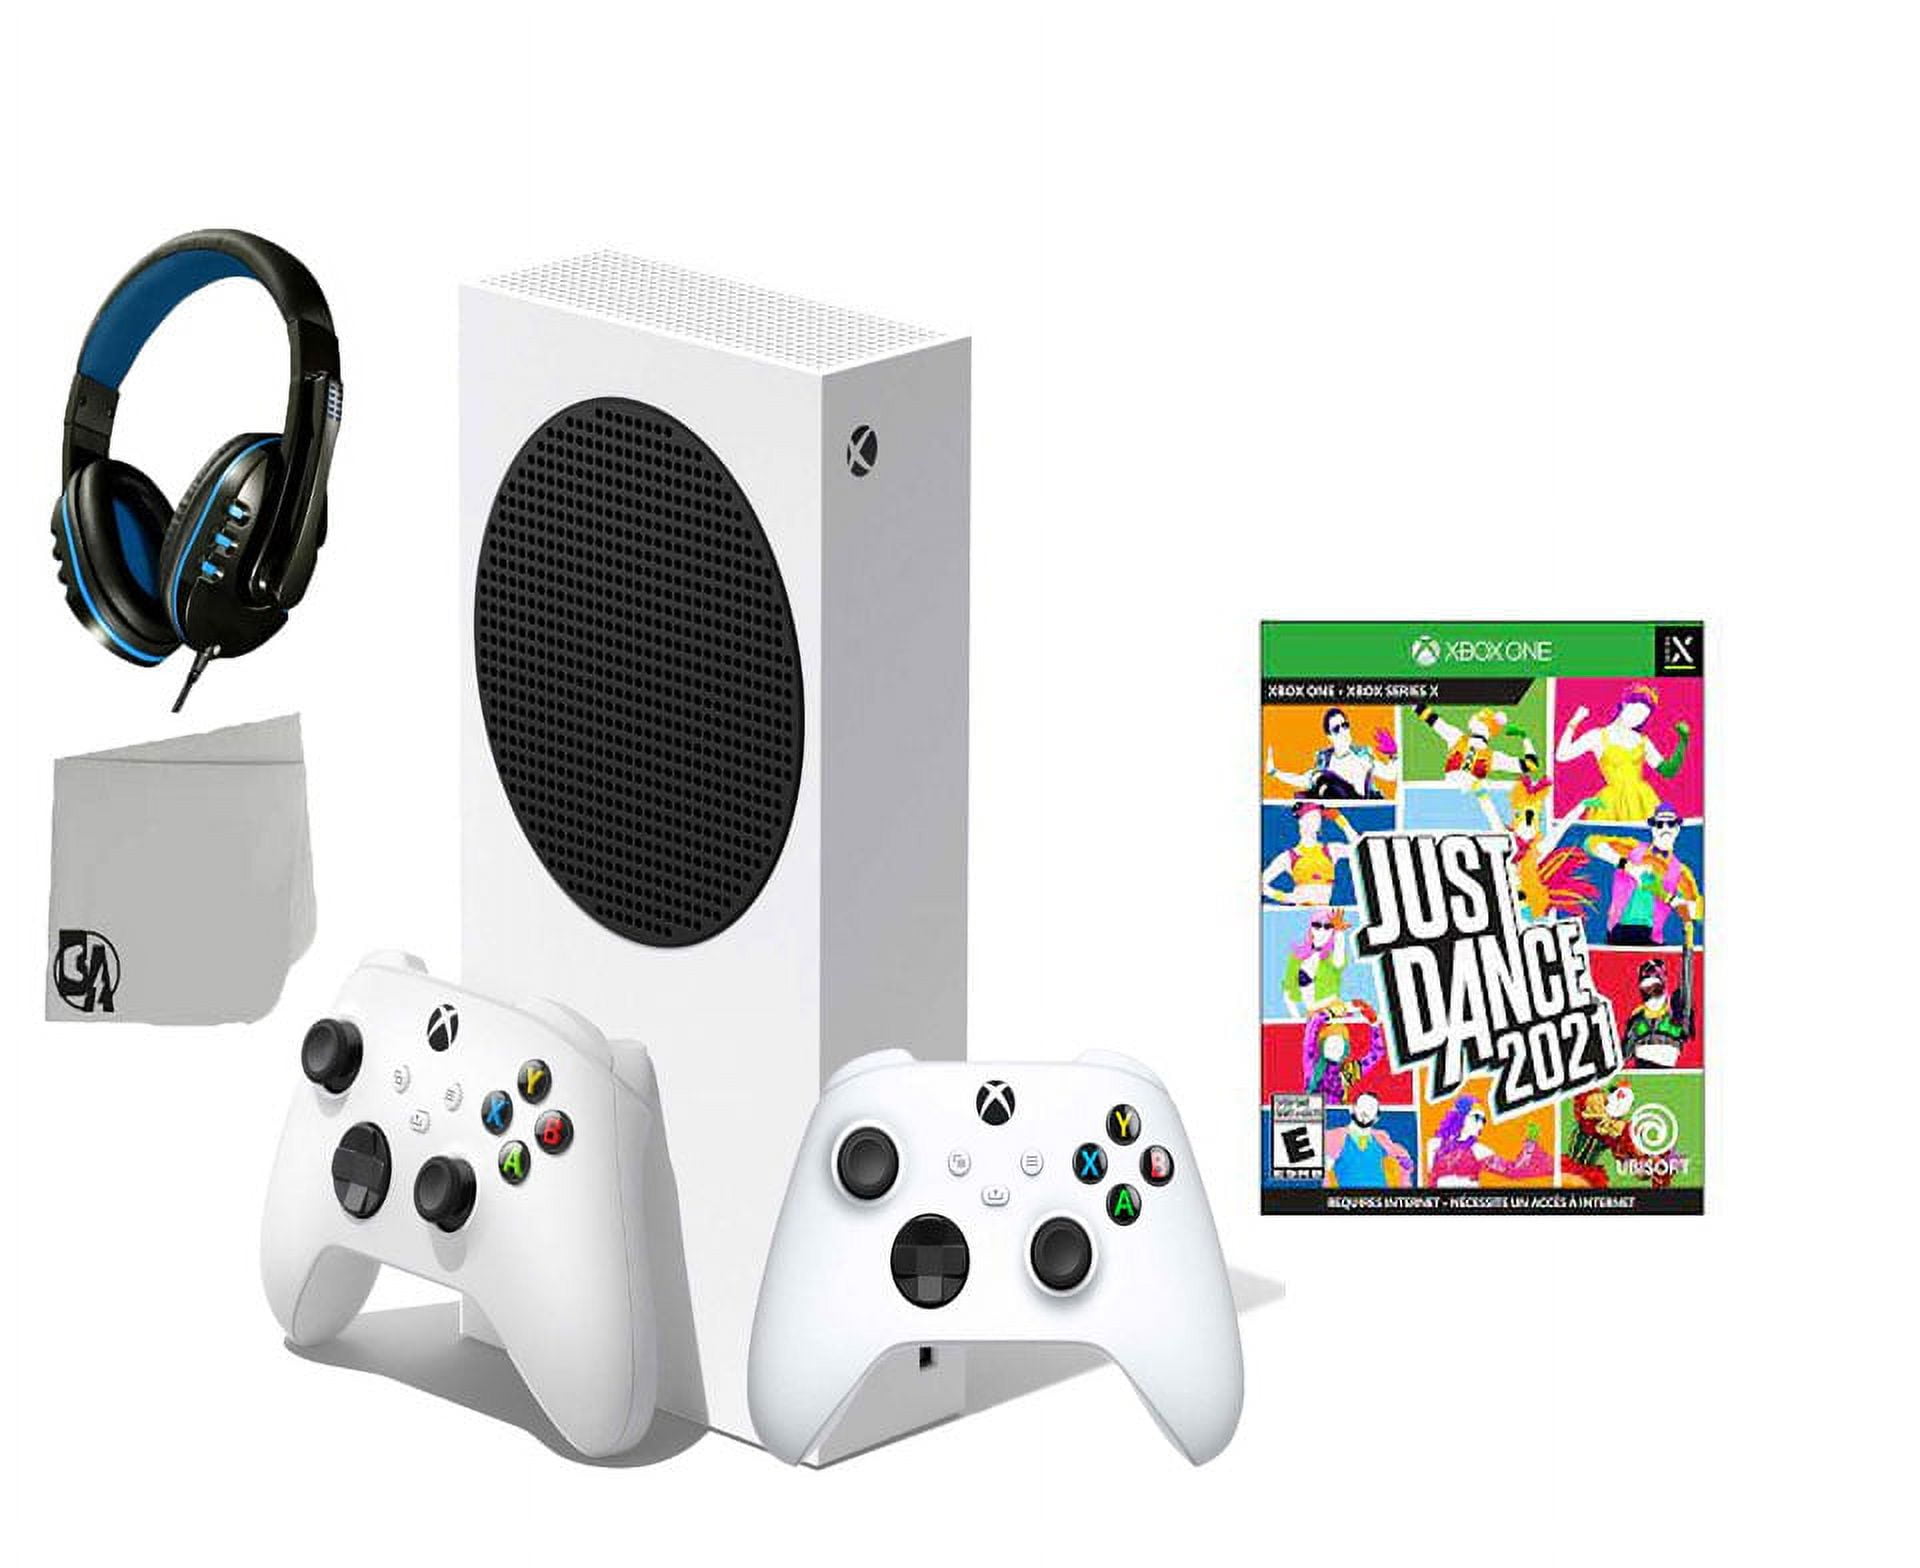 AO.com selling Xbox One S and THREE games for £129 in insane Black Friday  offer